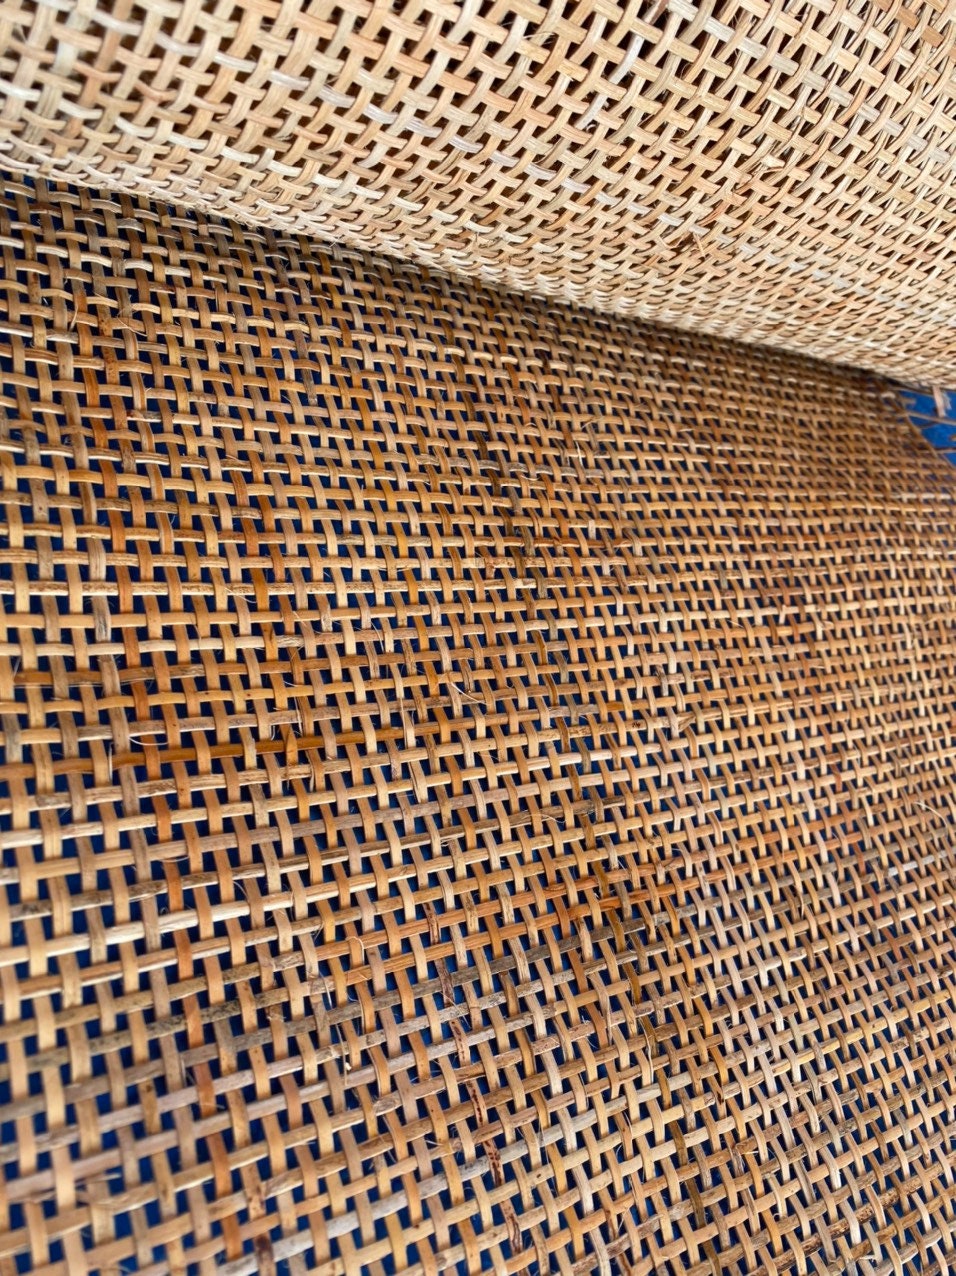 WIDTH 24'' Dark/white Natural Radio Rattan Cane Mesh Webbing Roll/caning  Material for Cane Furniture, DIY Project, Restoration 